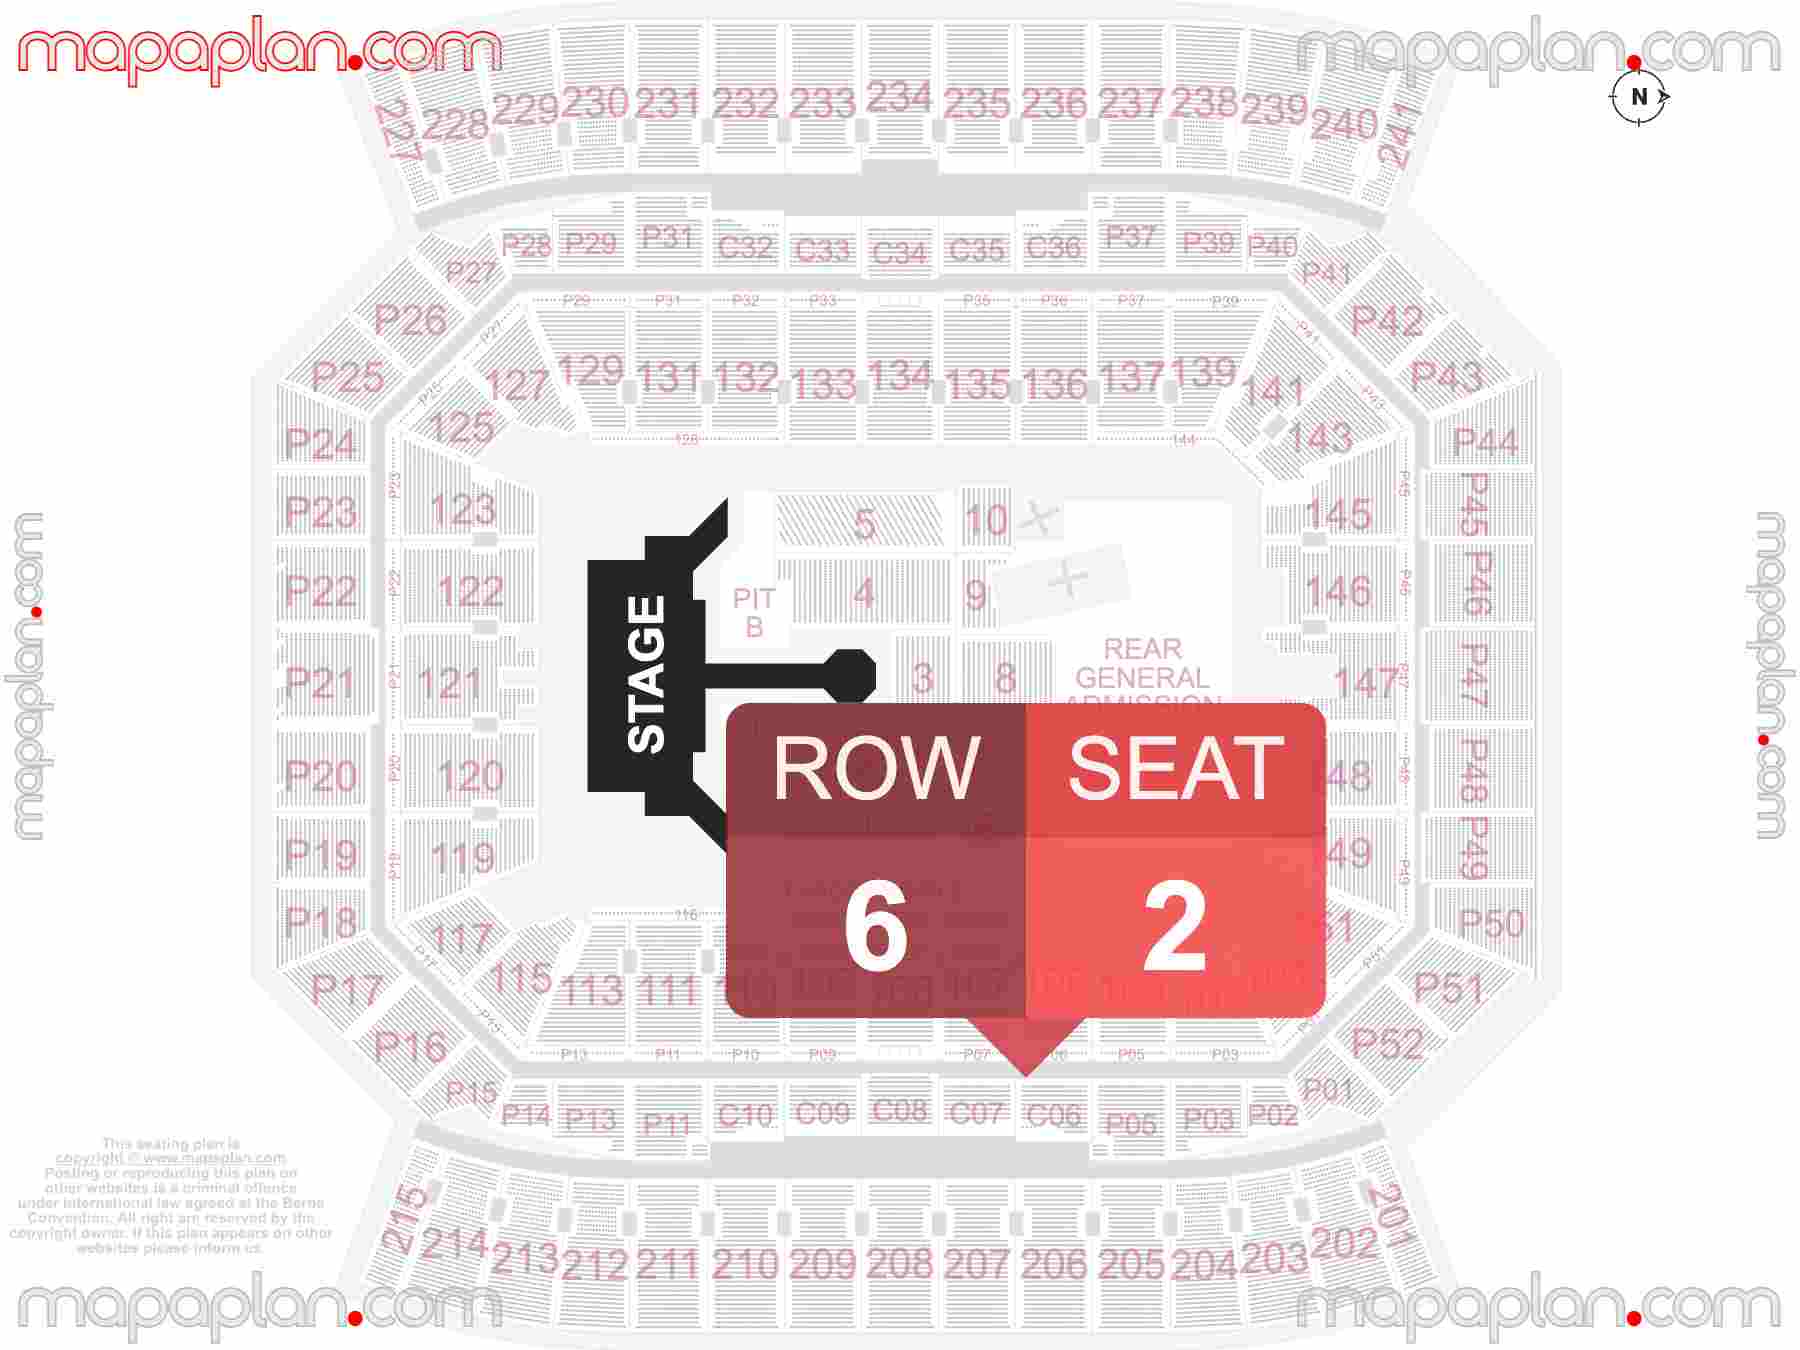 Orlando Camping World Stadium seating chart Concert with extended catwalk runway B-stage & PIT floor standing room only seating chart with exact section numbers showing best rows and seats selection 3d layout - Best interactive seat finder tool with precise detailed location data